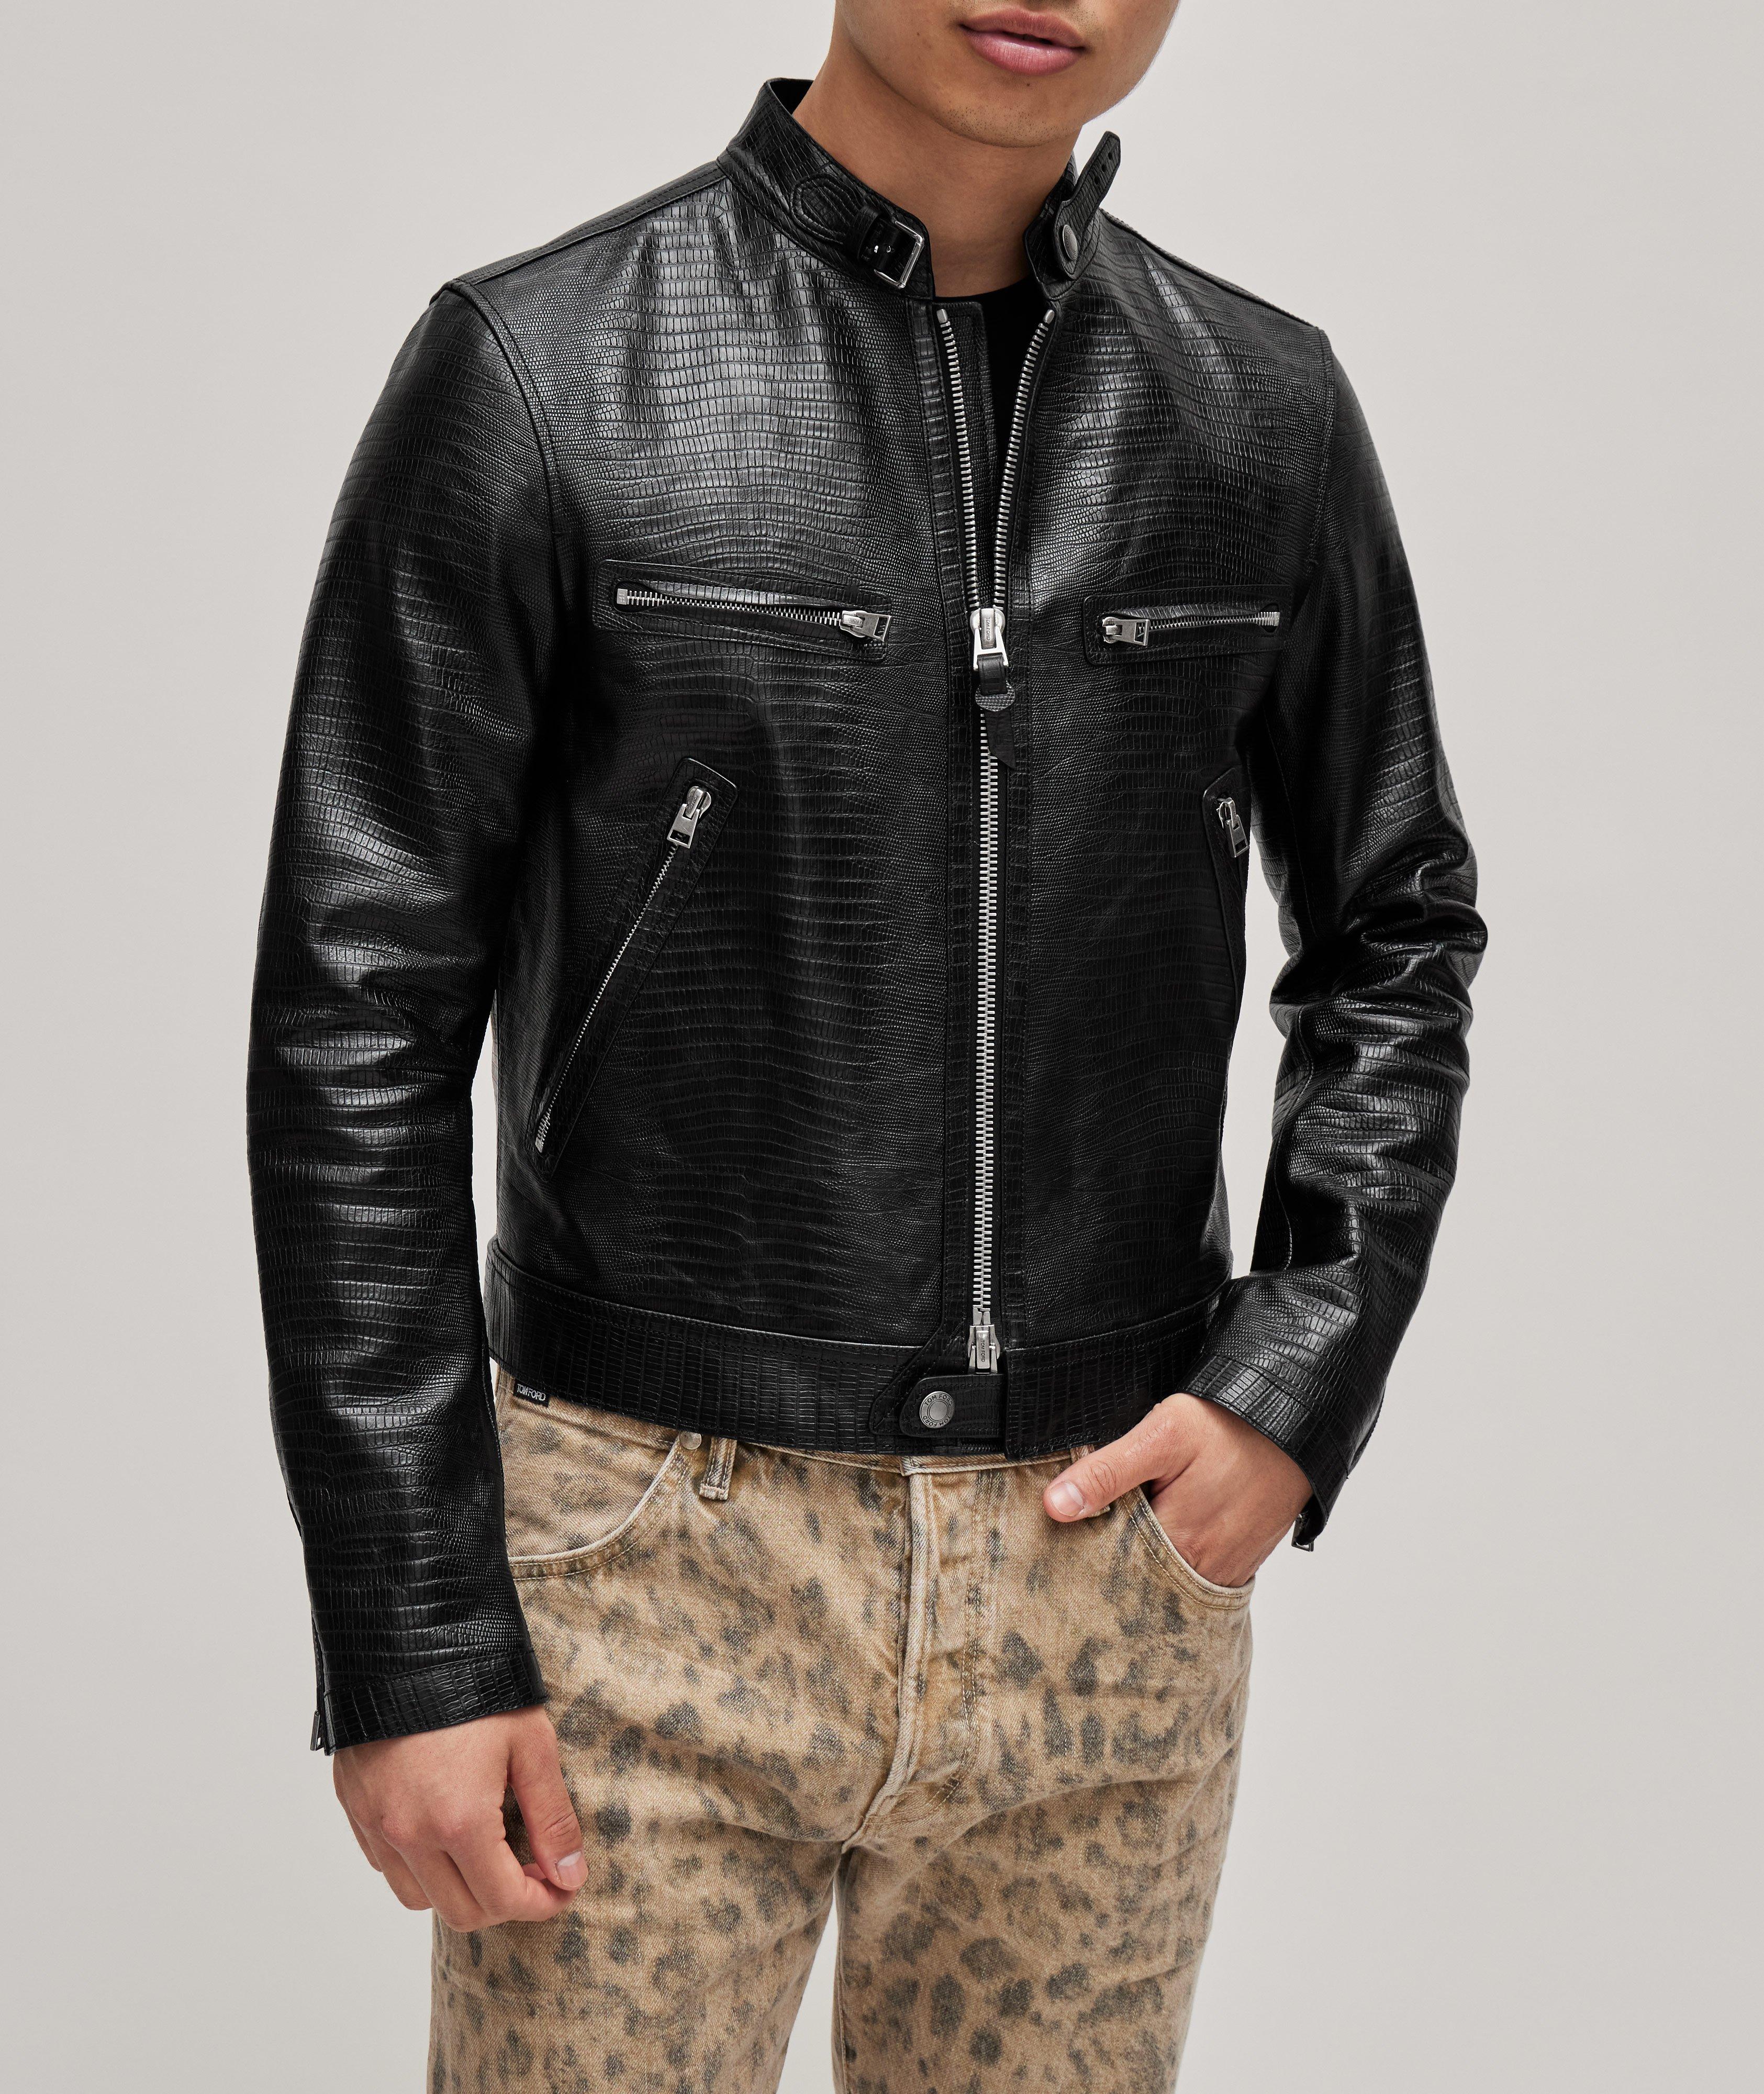 TOM FORD Stamped Tejus Zip Racer Jacket, Leather